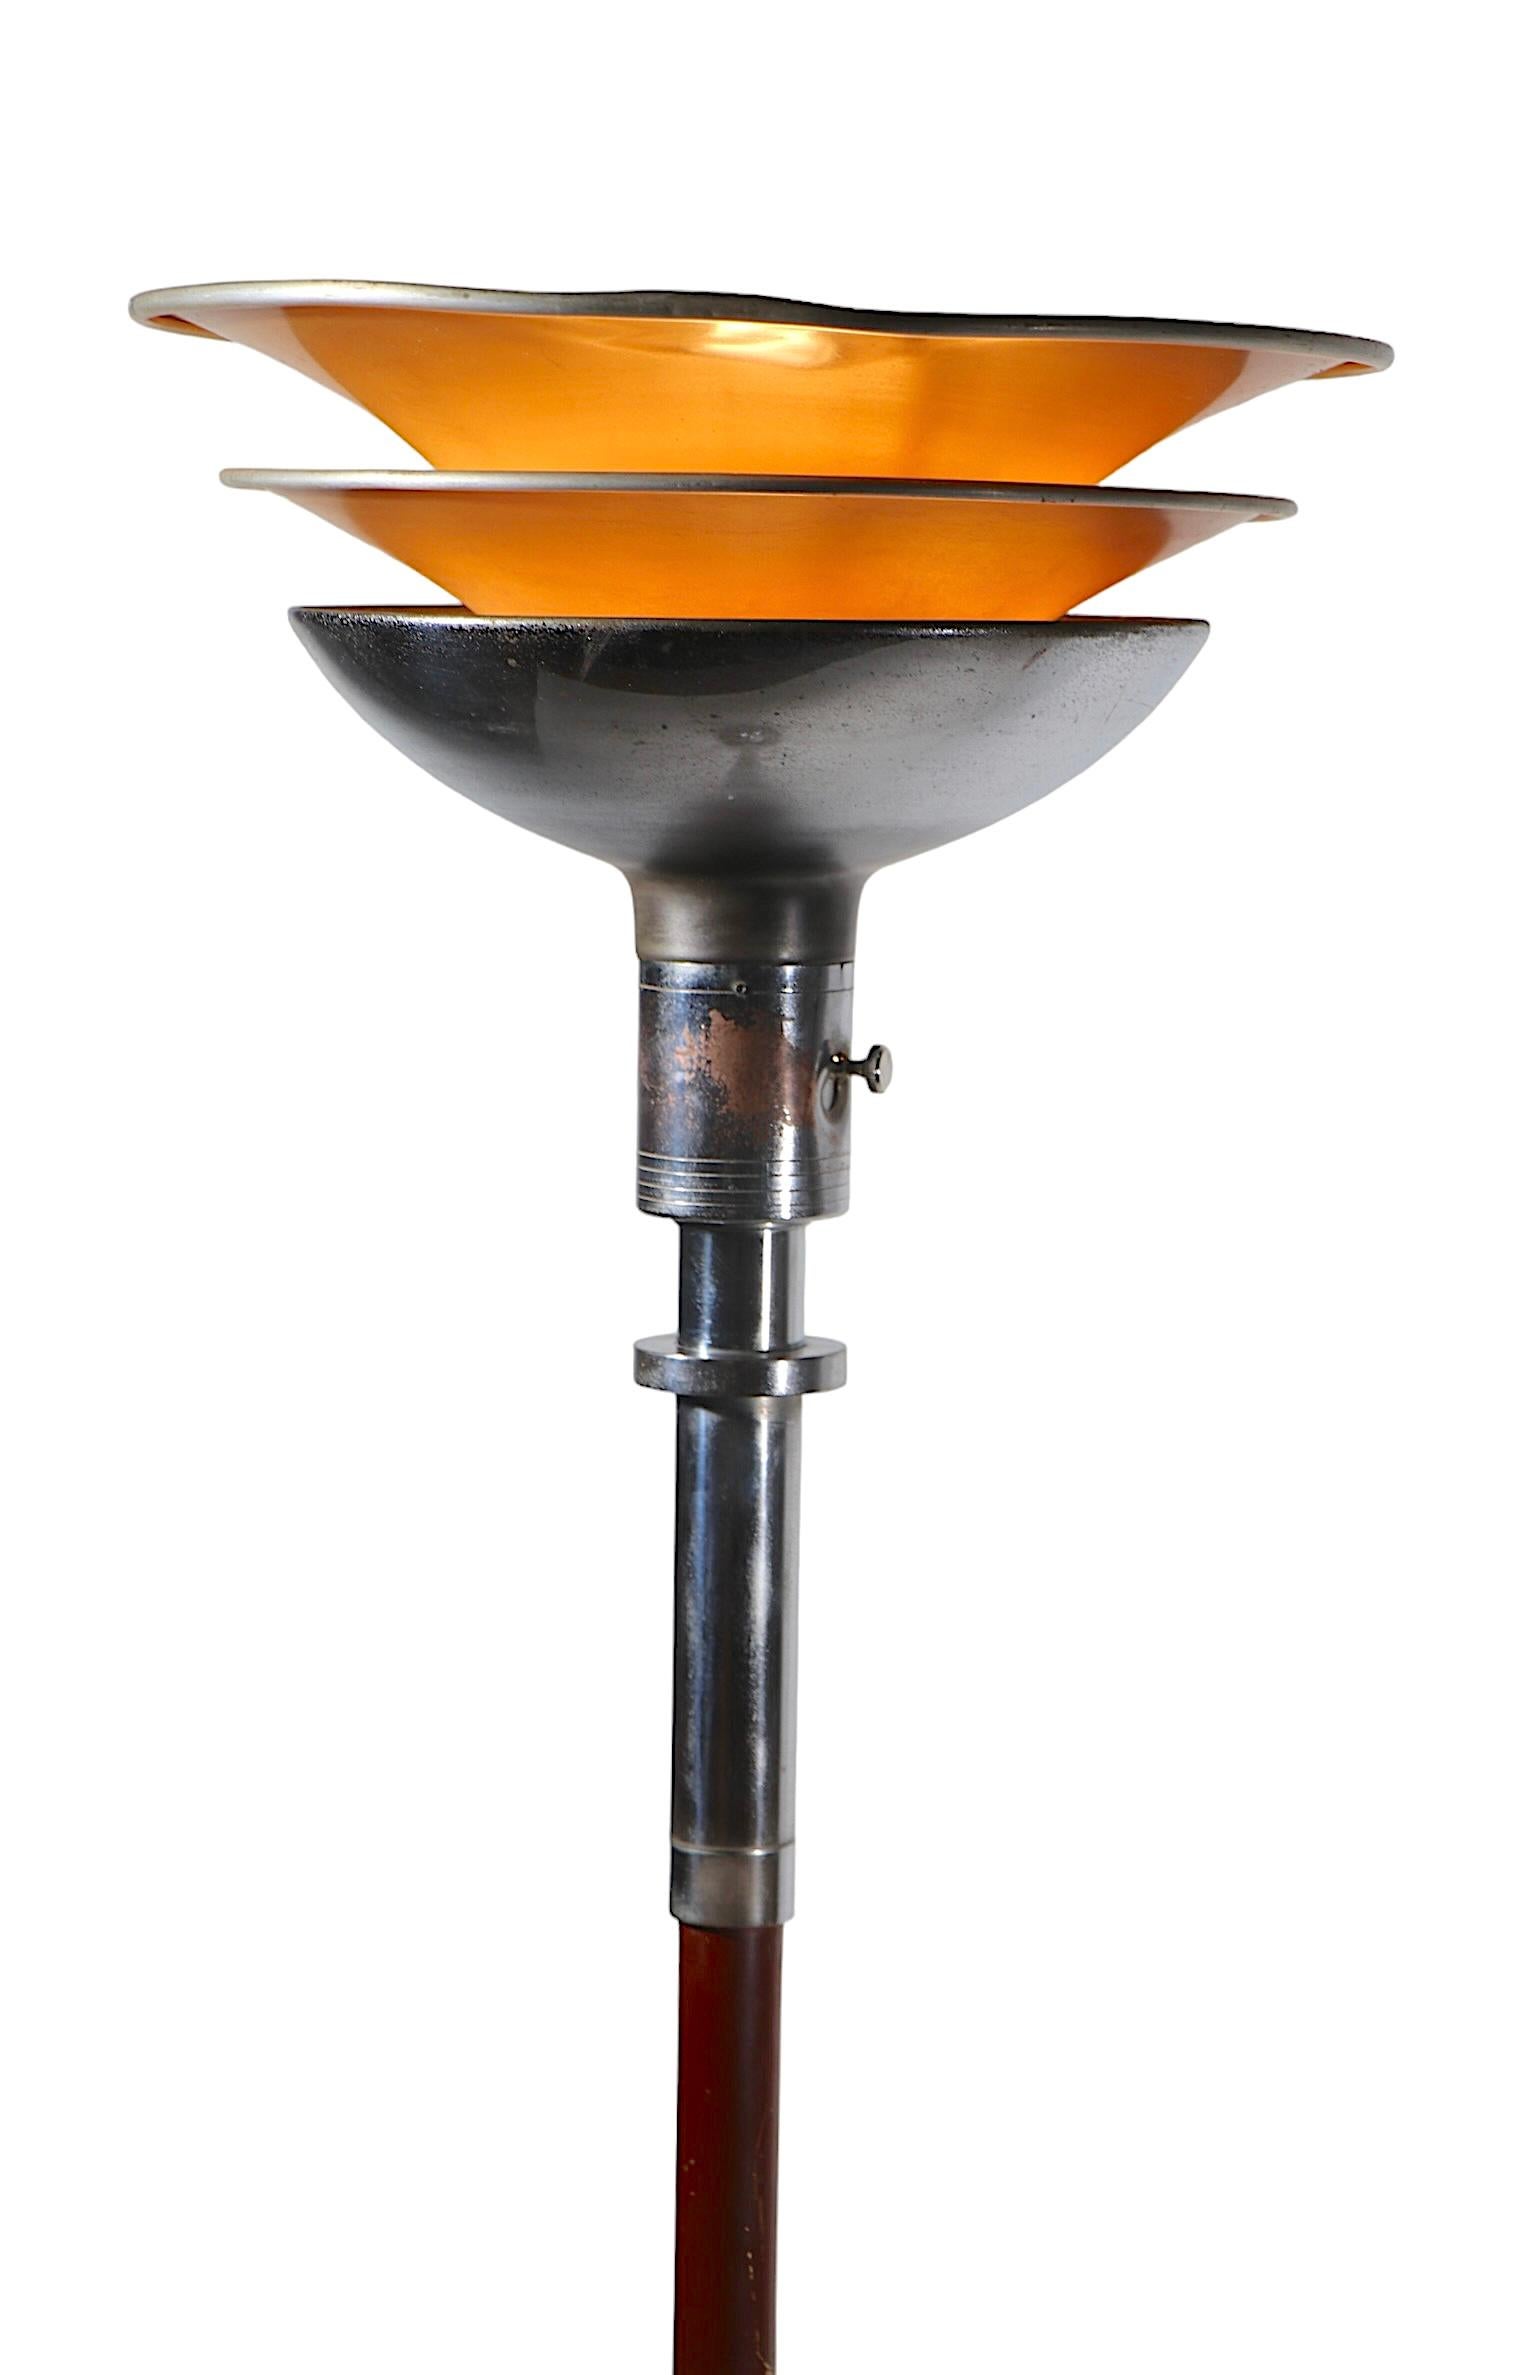 Art Deco Machine Age Torchiere  Floor Lamp by Rohde for Mutual Sunset Lamp Co.  For Sale 1